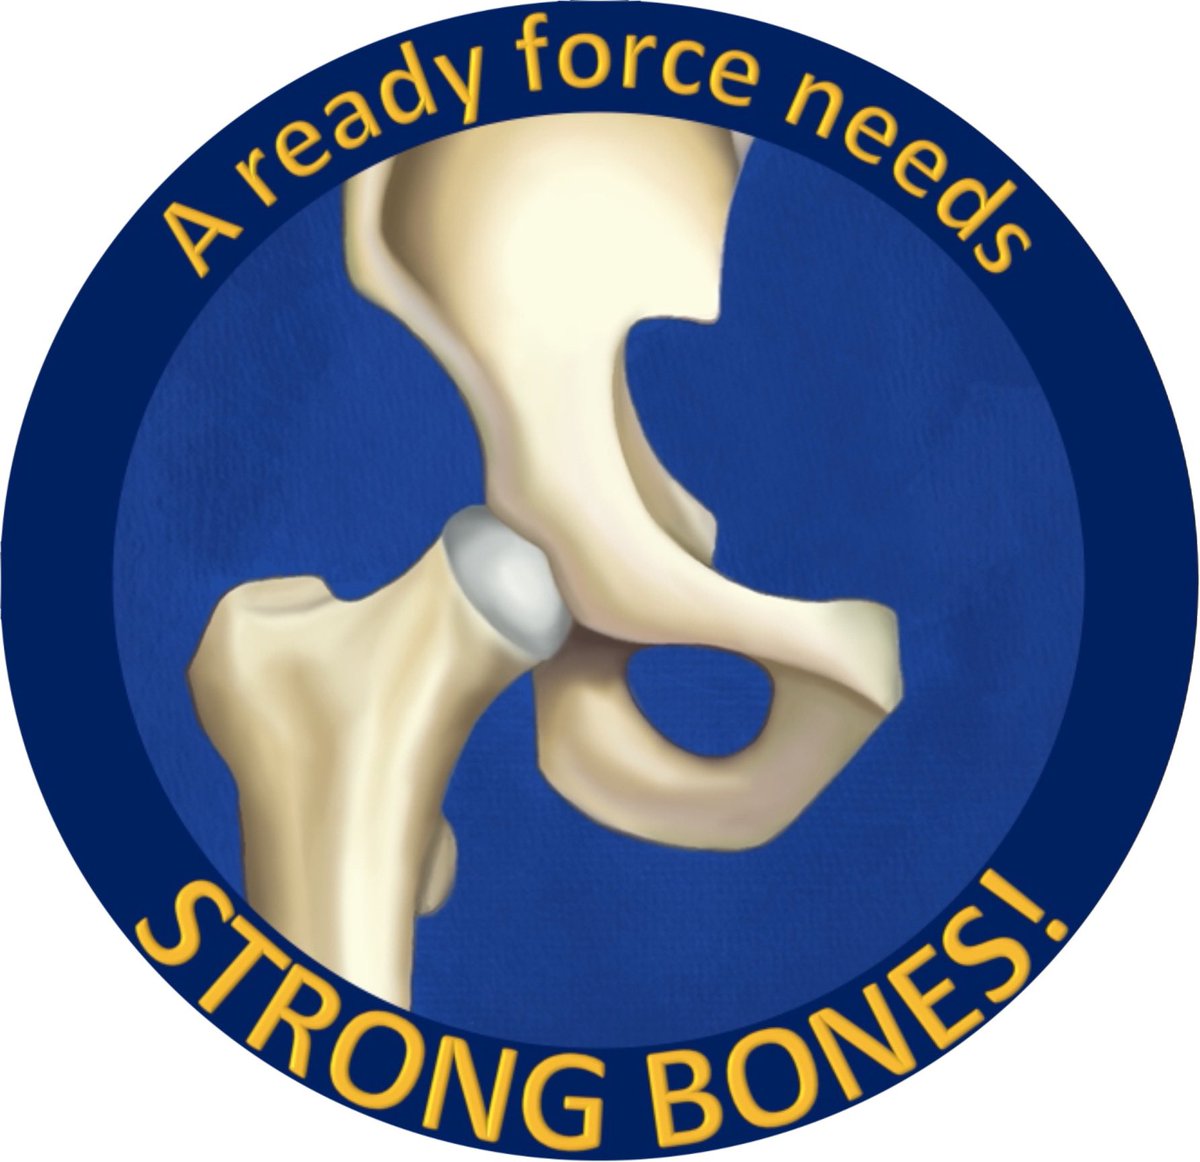 Back in the old ‘hood to talk bone health, stress fractures, & #StrongBones! We all agree that the time to ACT is long overdue!